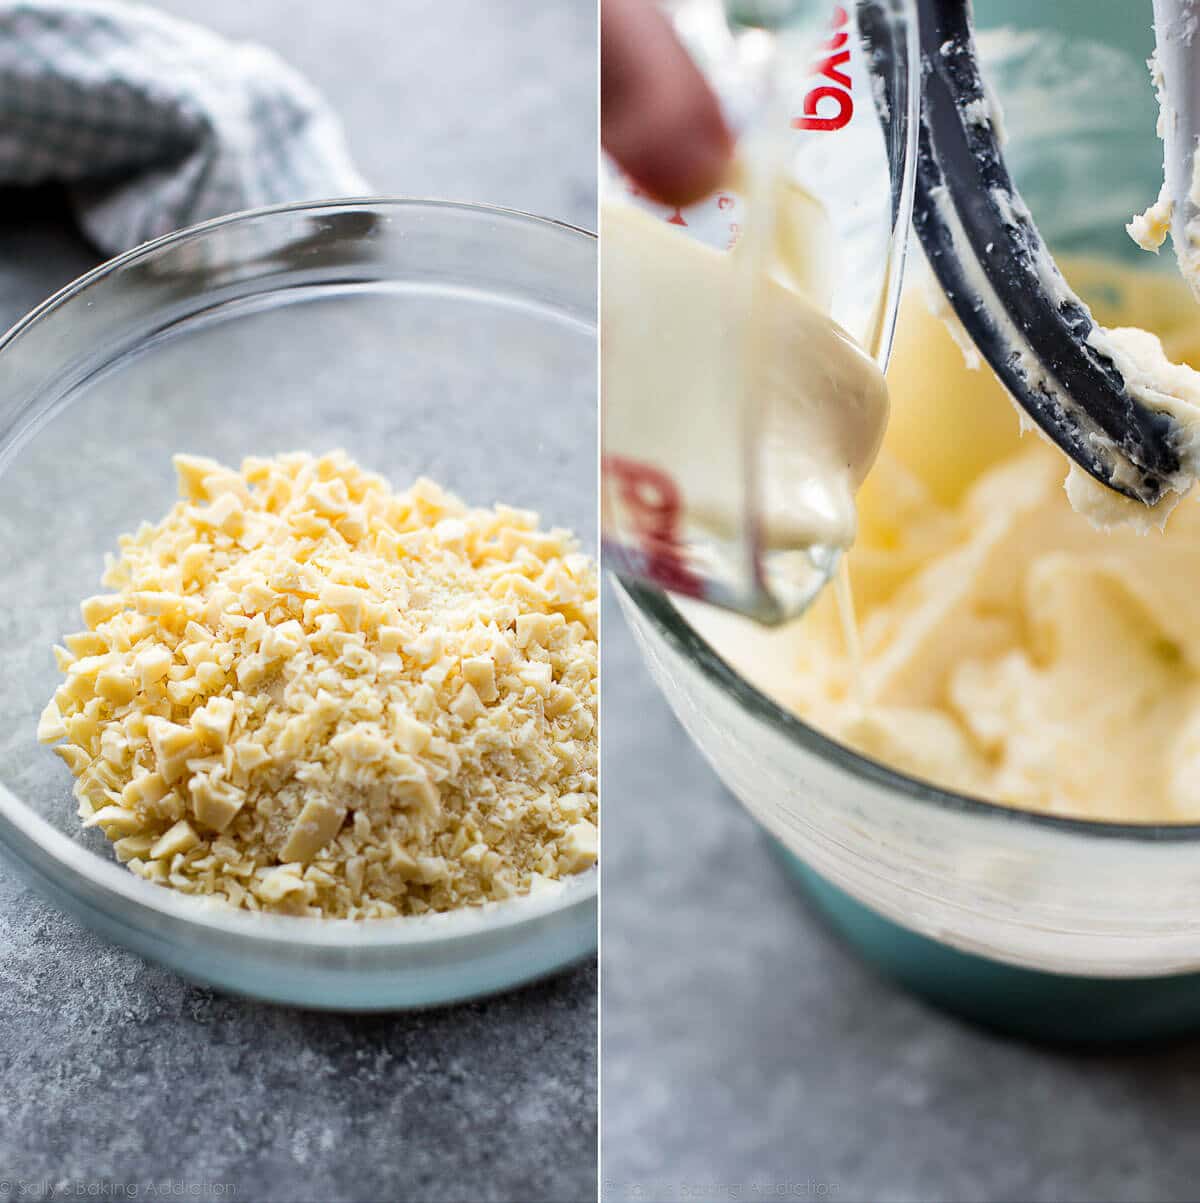 2 images of chopped white chocolate in a glass bowl and pouring melted white chocolate into vanilla buttercream in a glass bowl